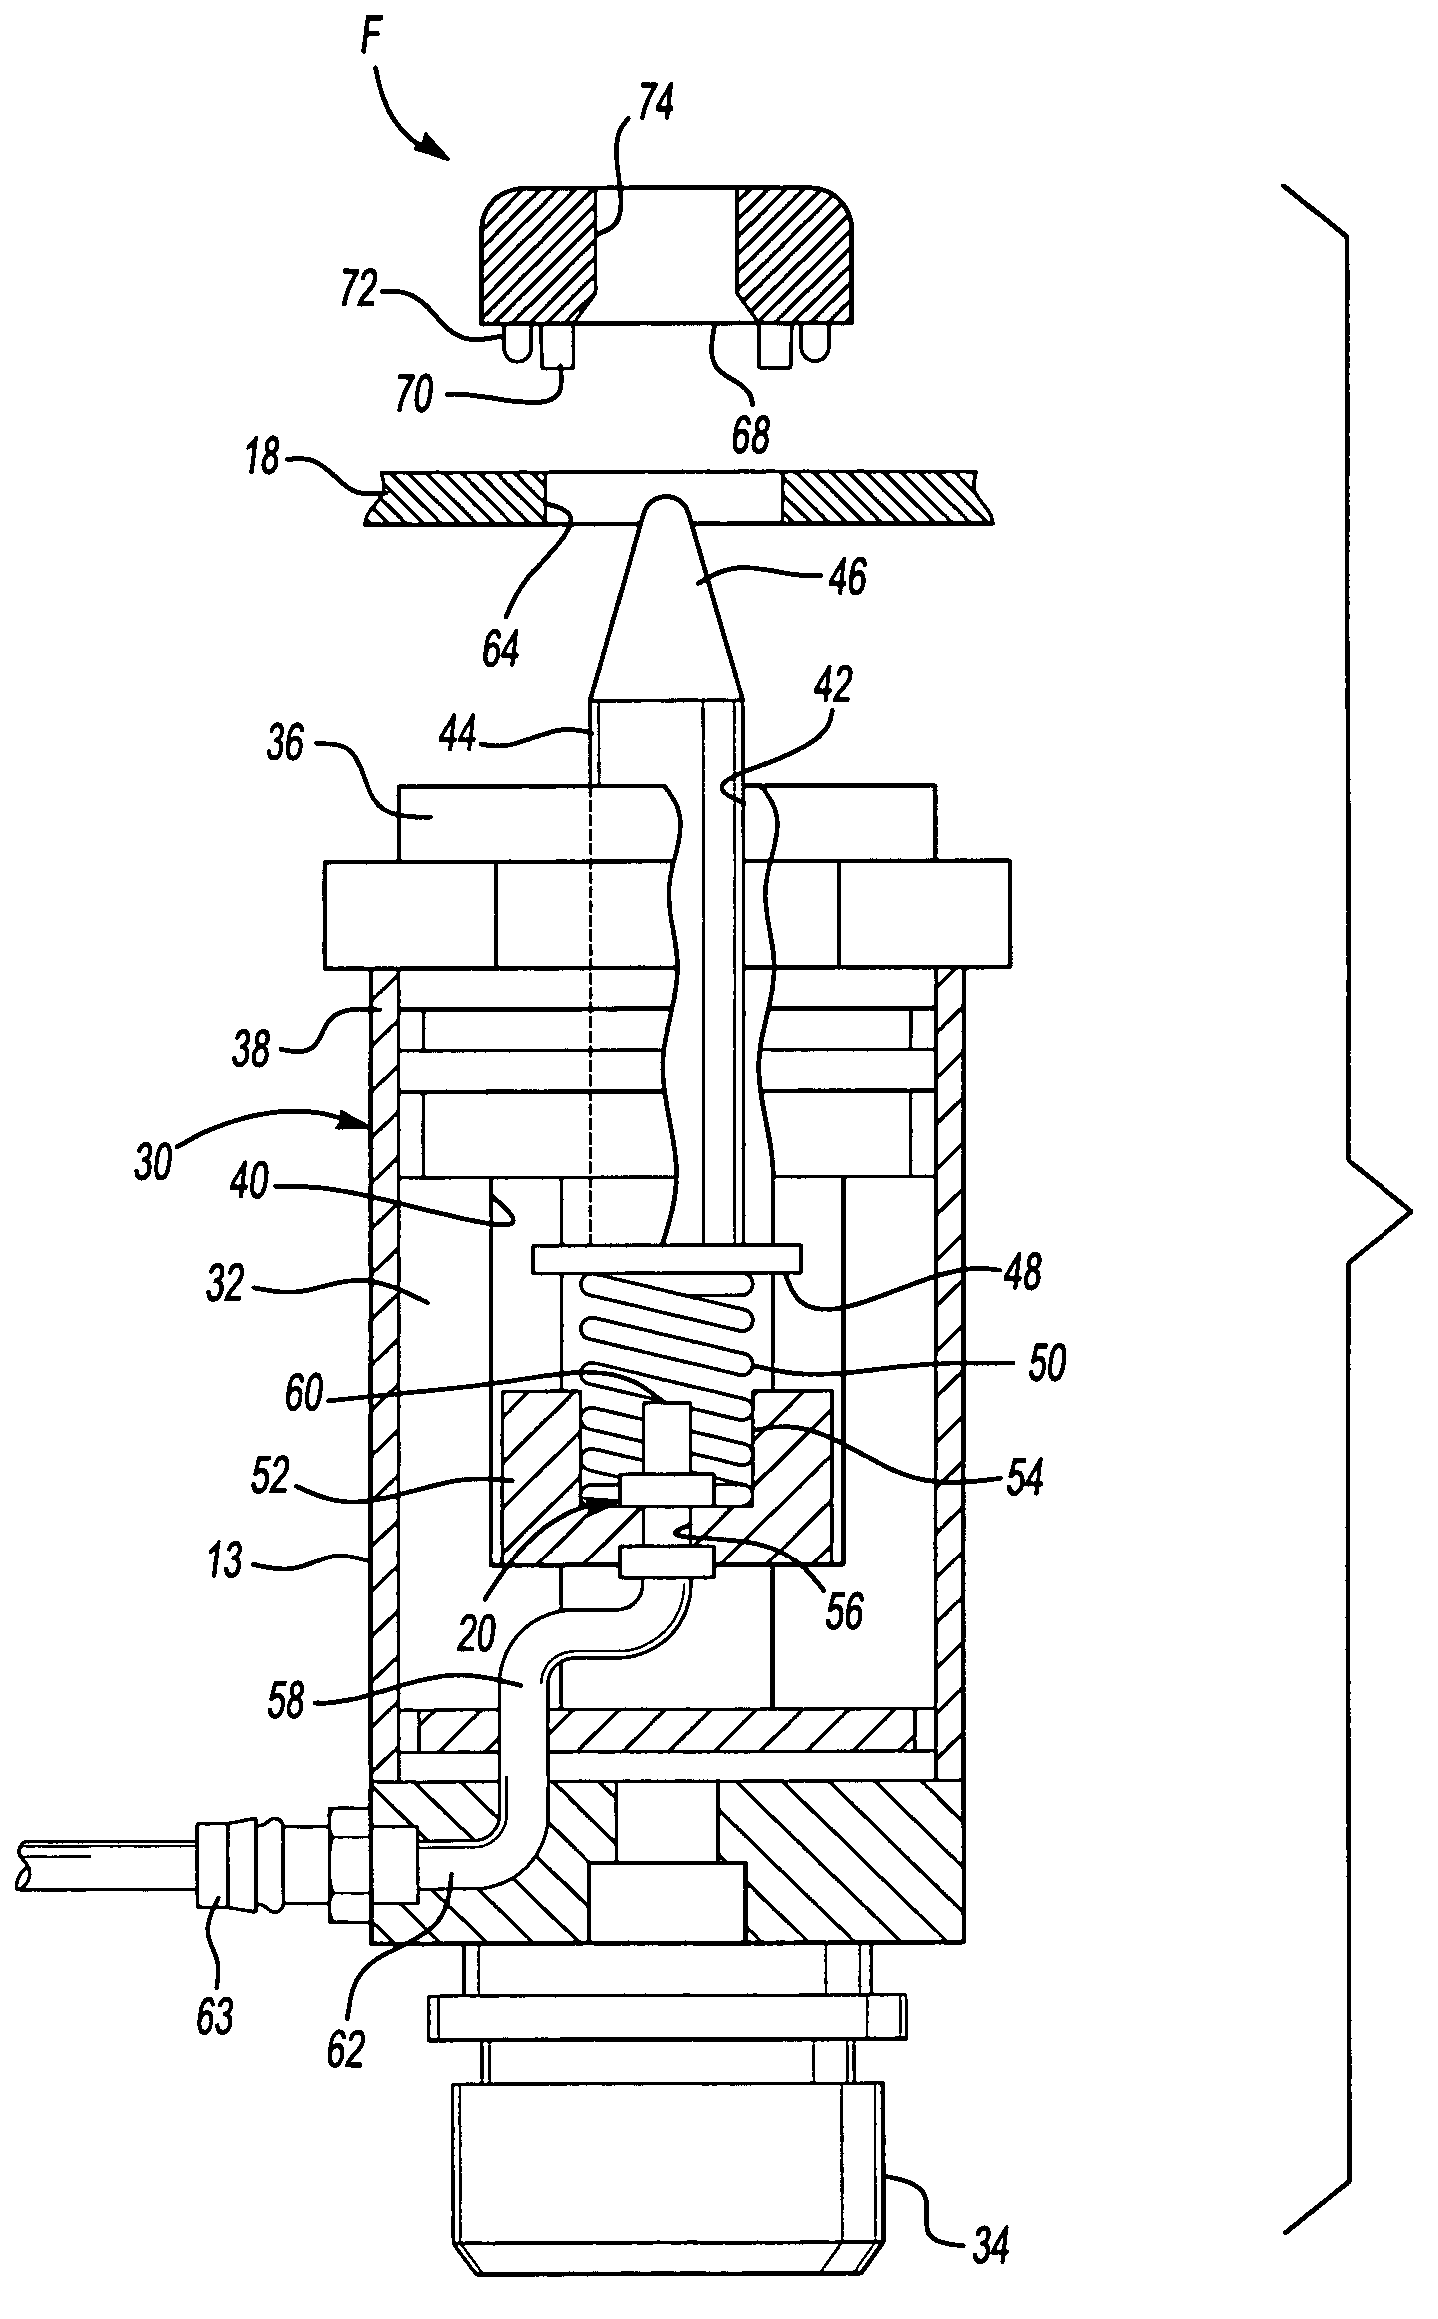 Resistance welding fastener electrode and monitor and method of using same